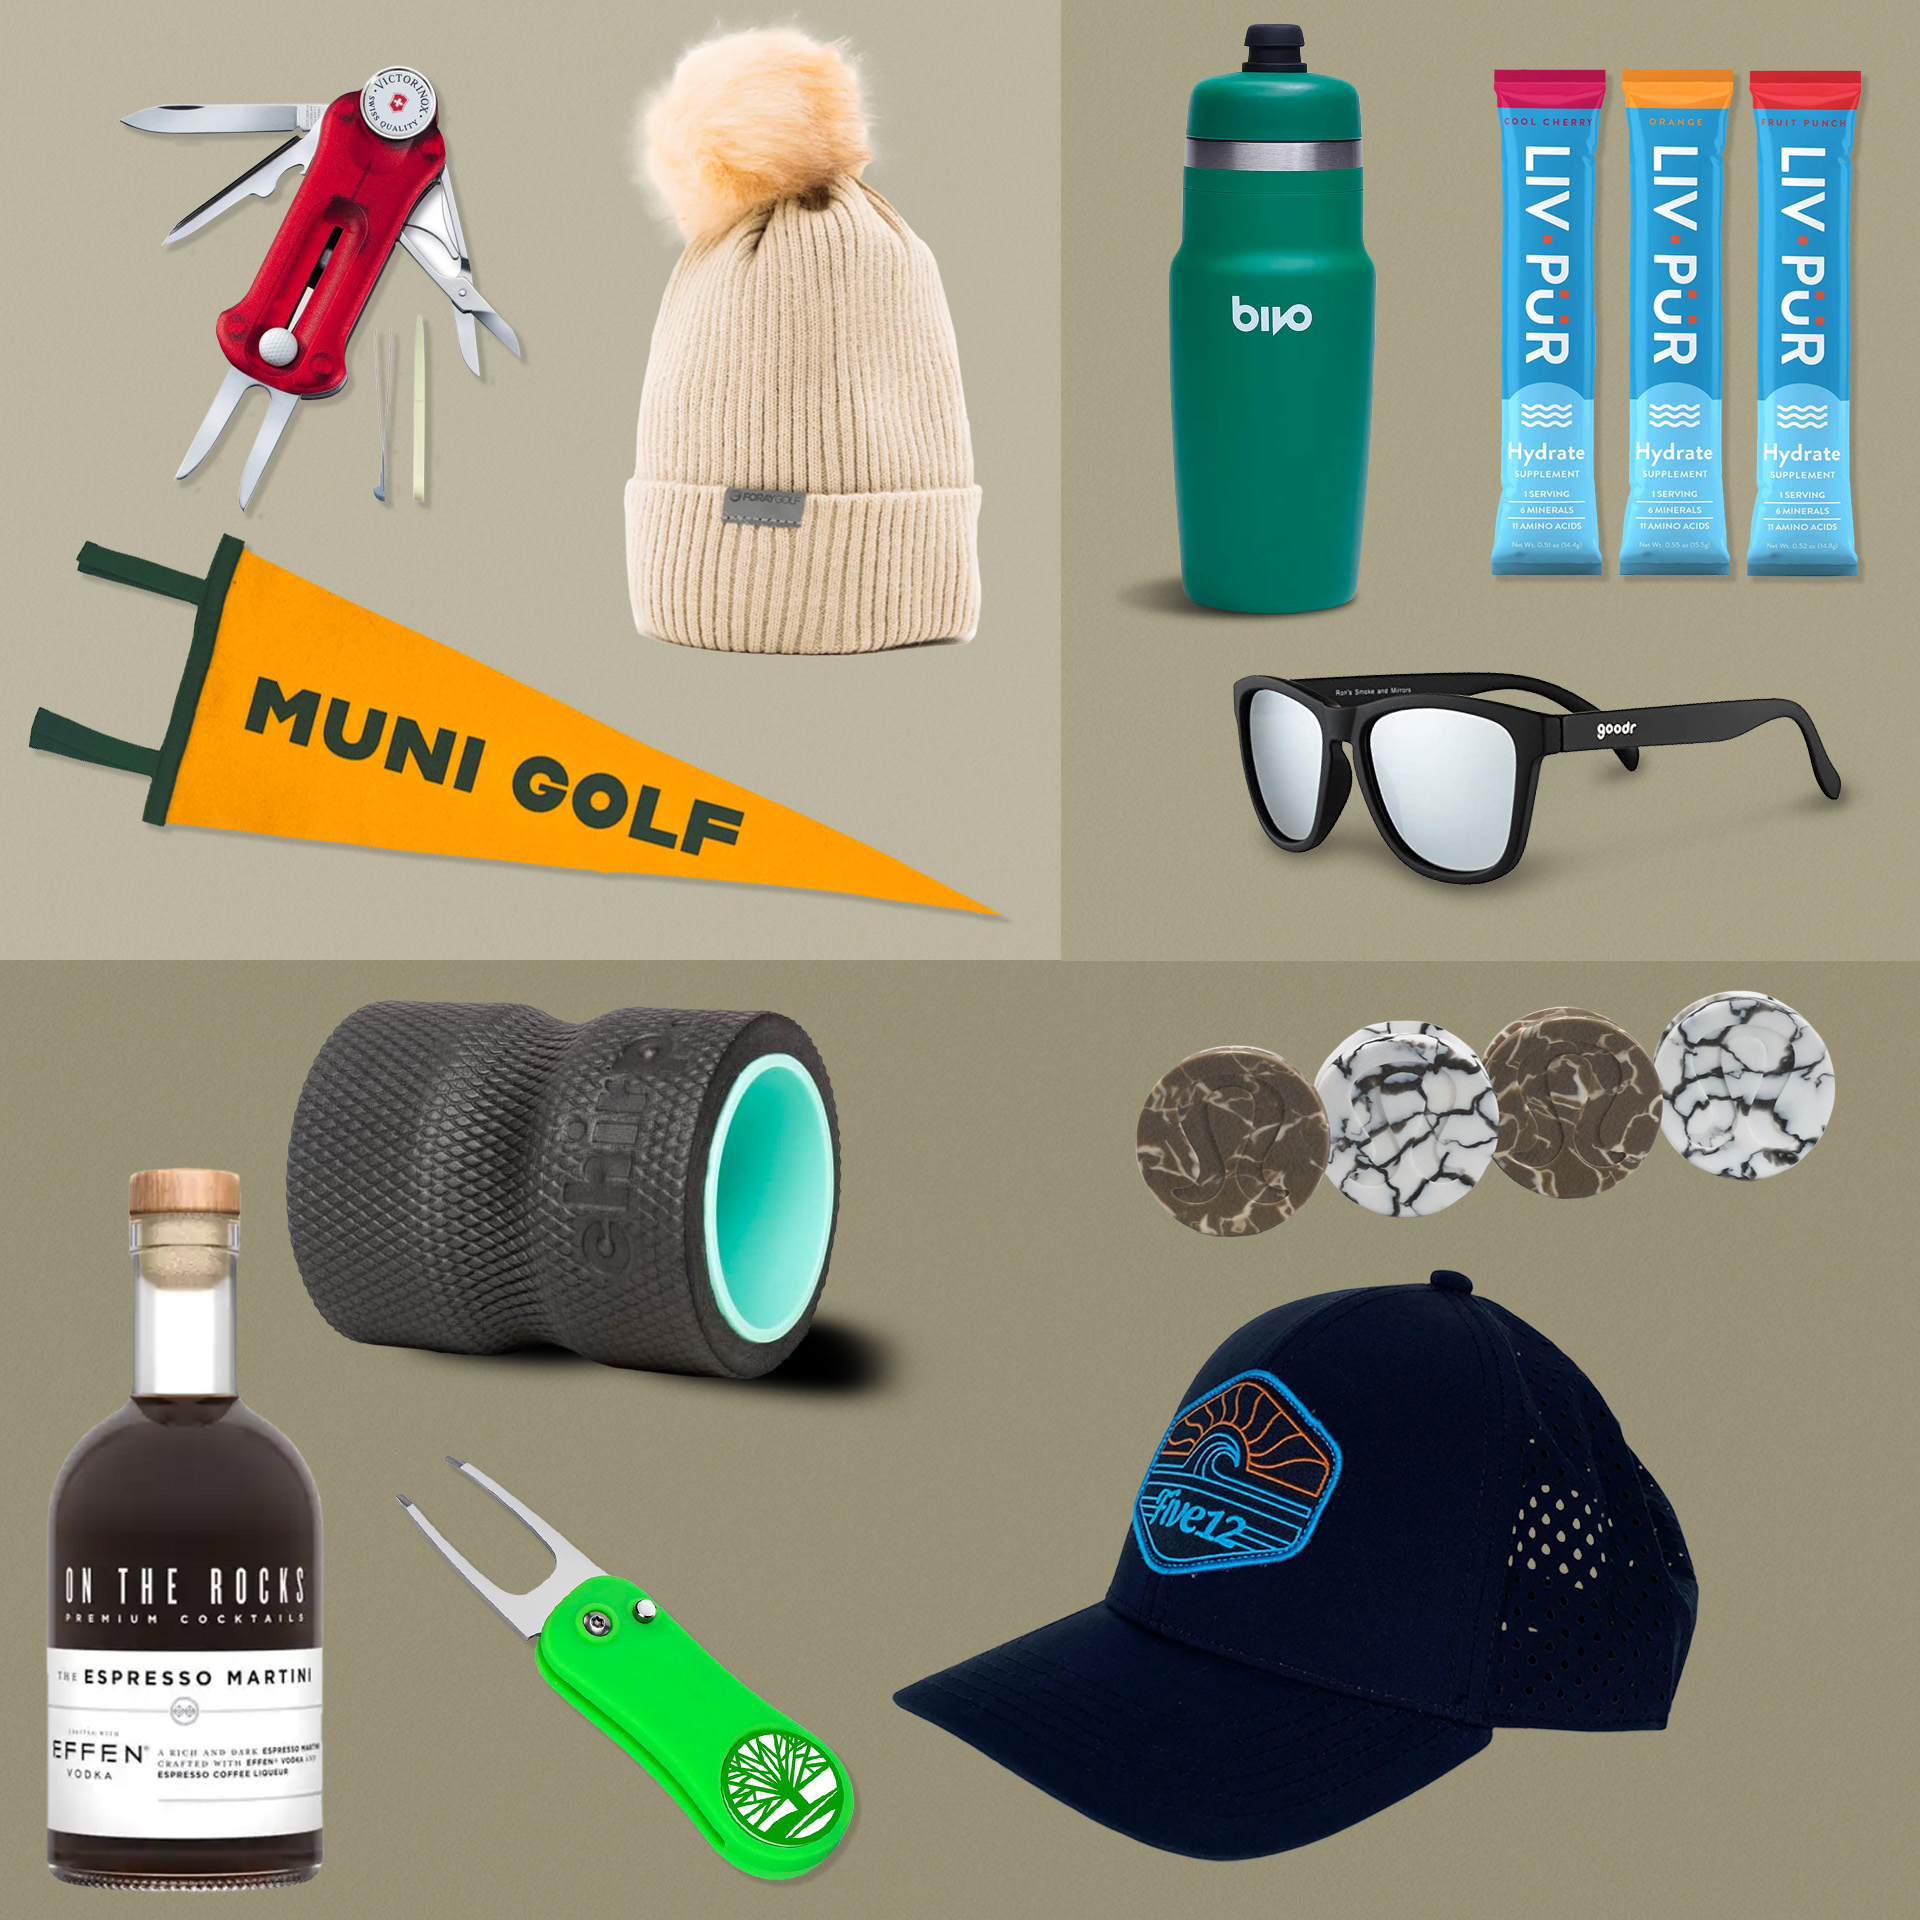 10 Cheap Golf Gifts: Ideas Under $10, $20, or $30